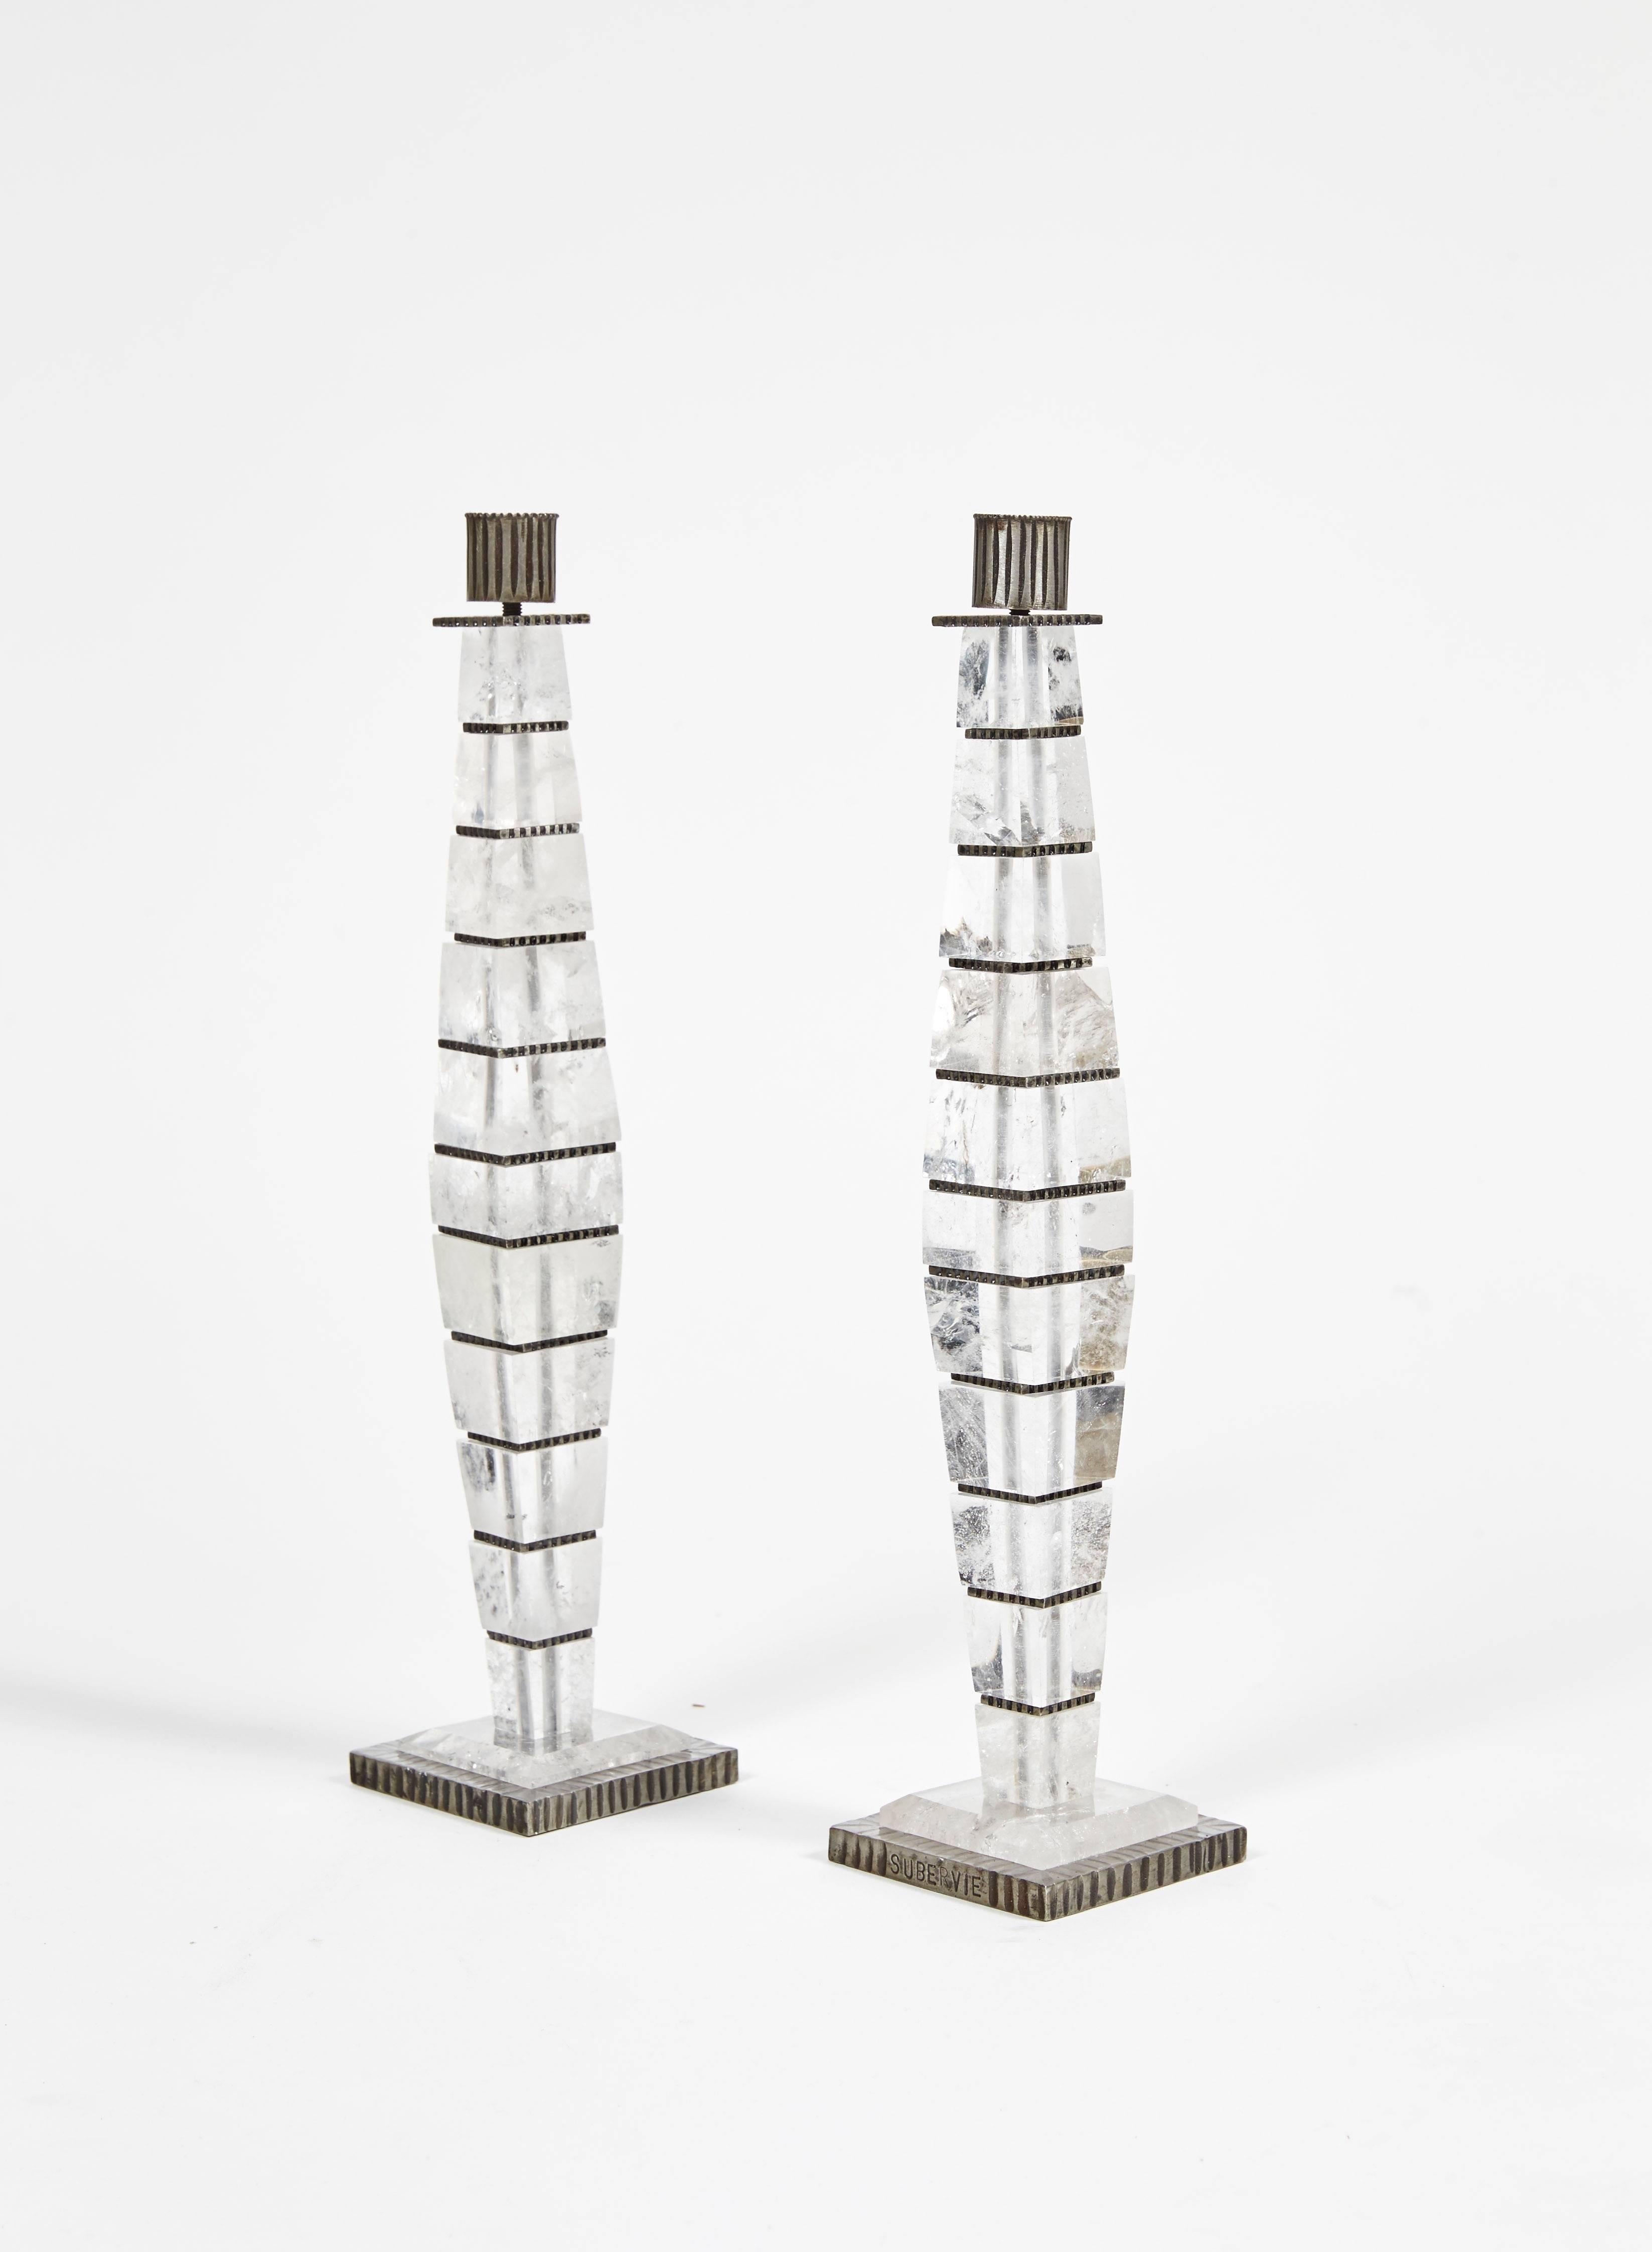 A Pair of Square Candlesticks, 2003
Twelve elements in rock cristal, spacers and base in hammered wrought iron